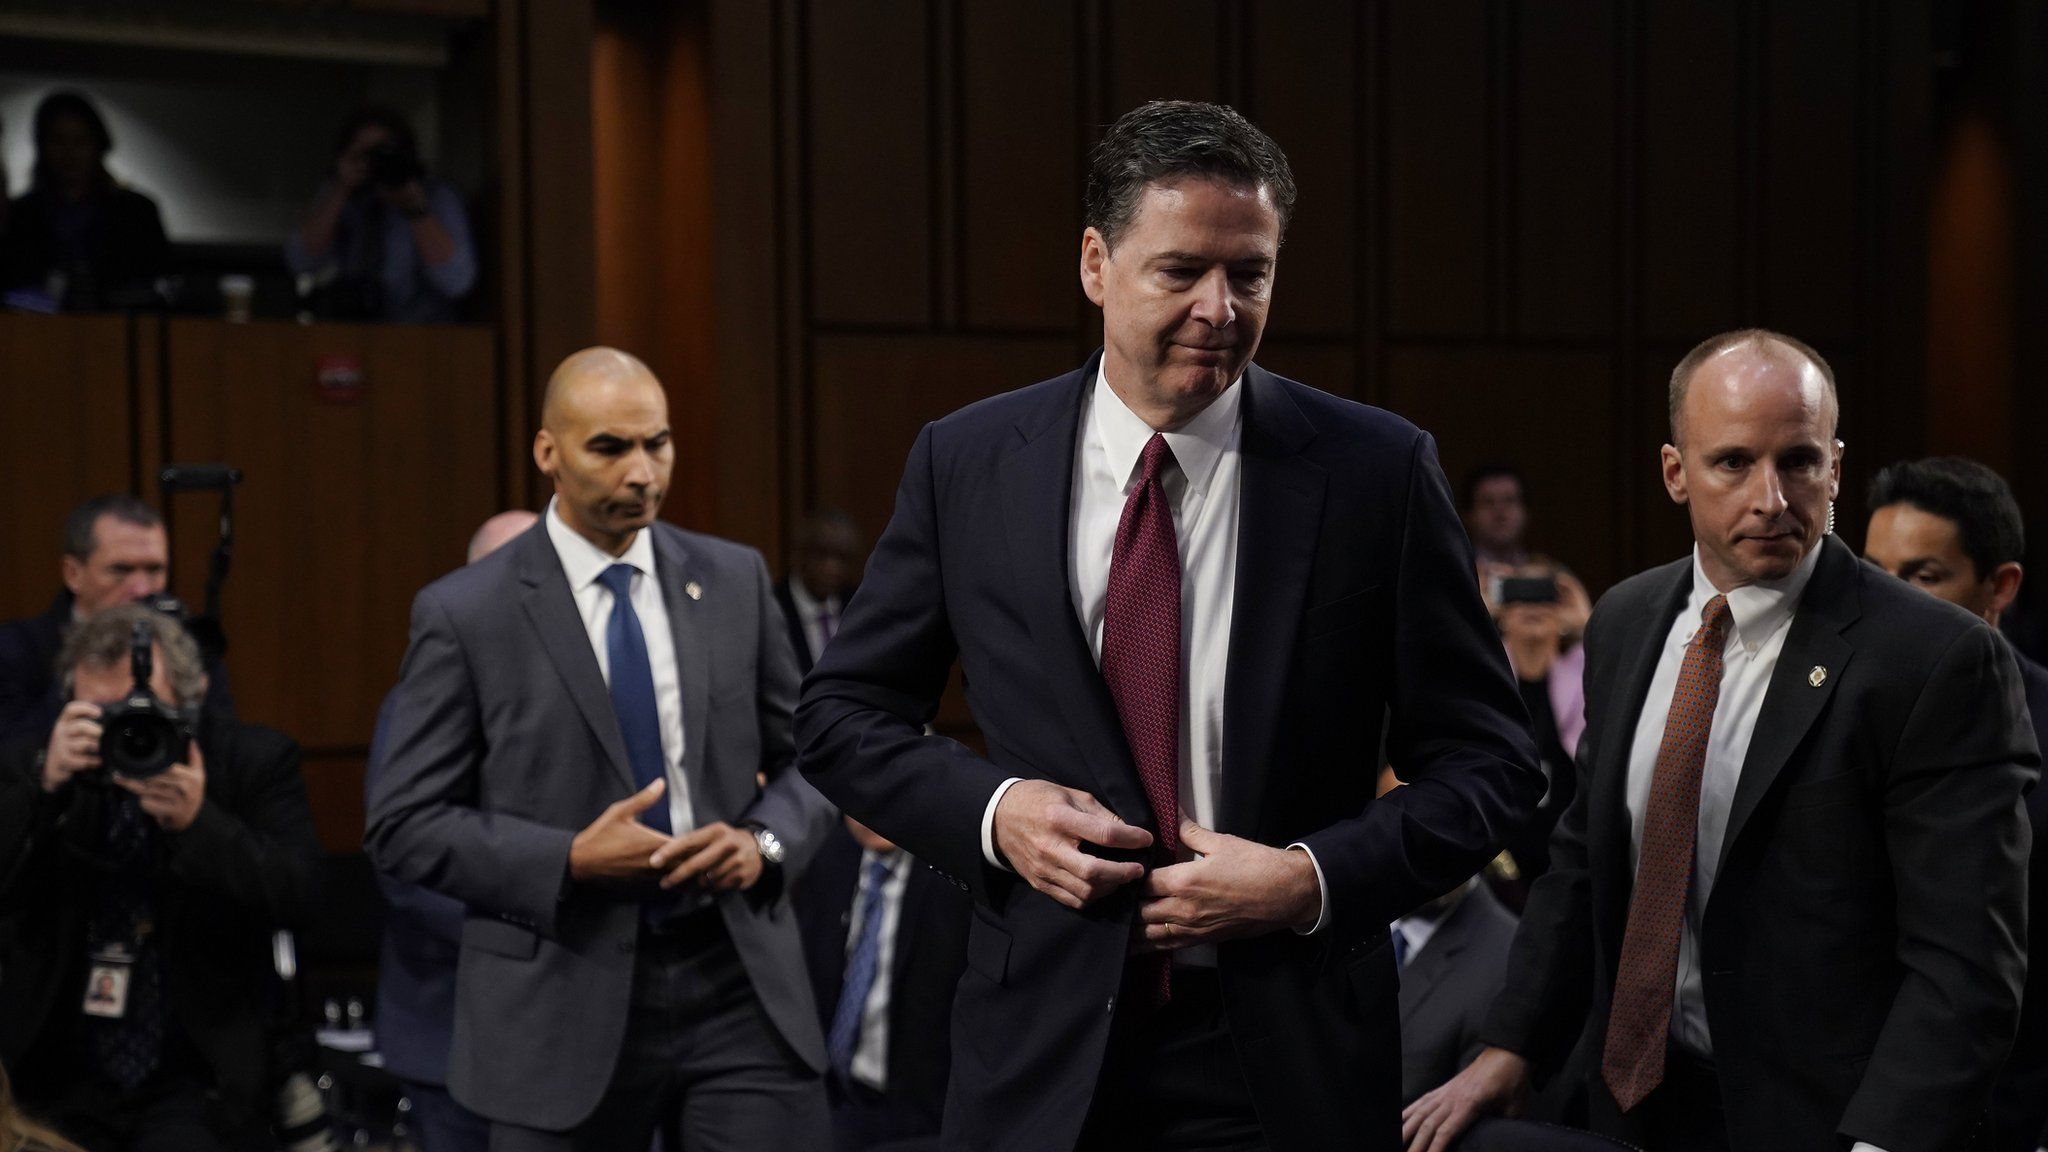 James Comey gets up to leave after giving testimony to the Senate Intelligence Committee